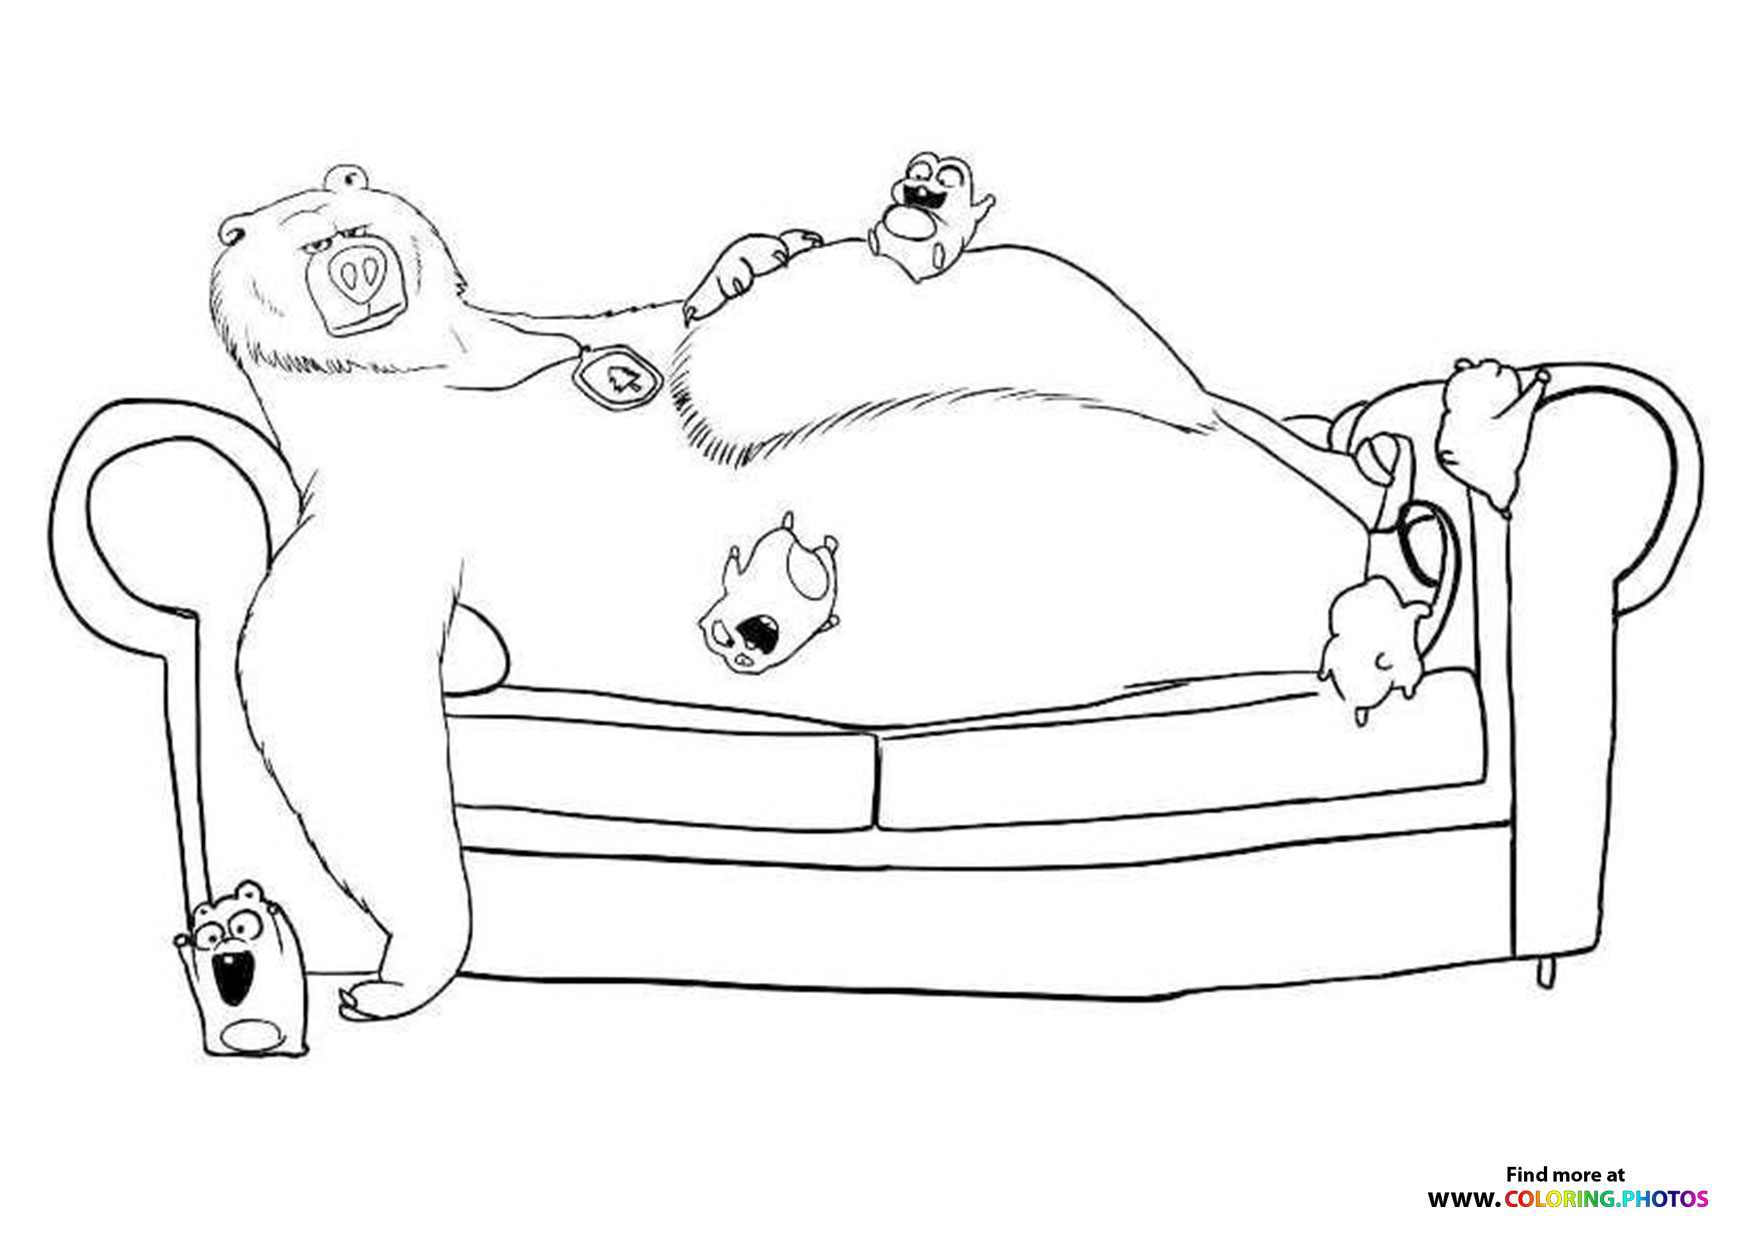 Grizzy on sofa with Lemmings - Coloring Pages for kids